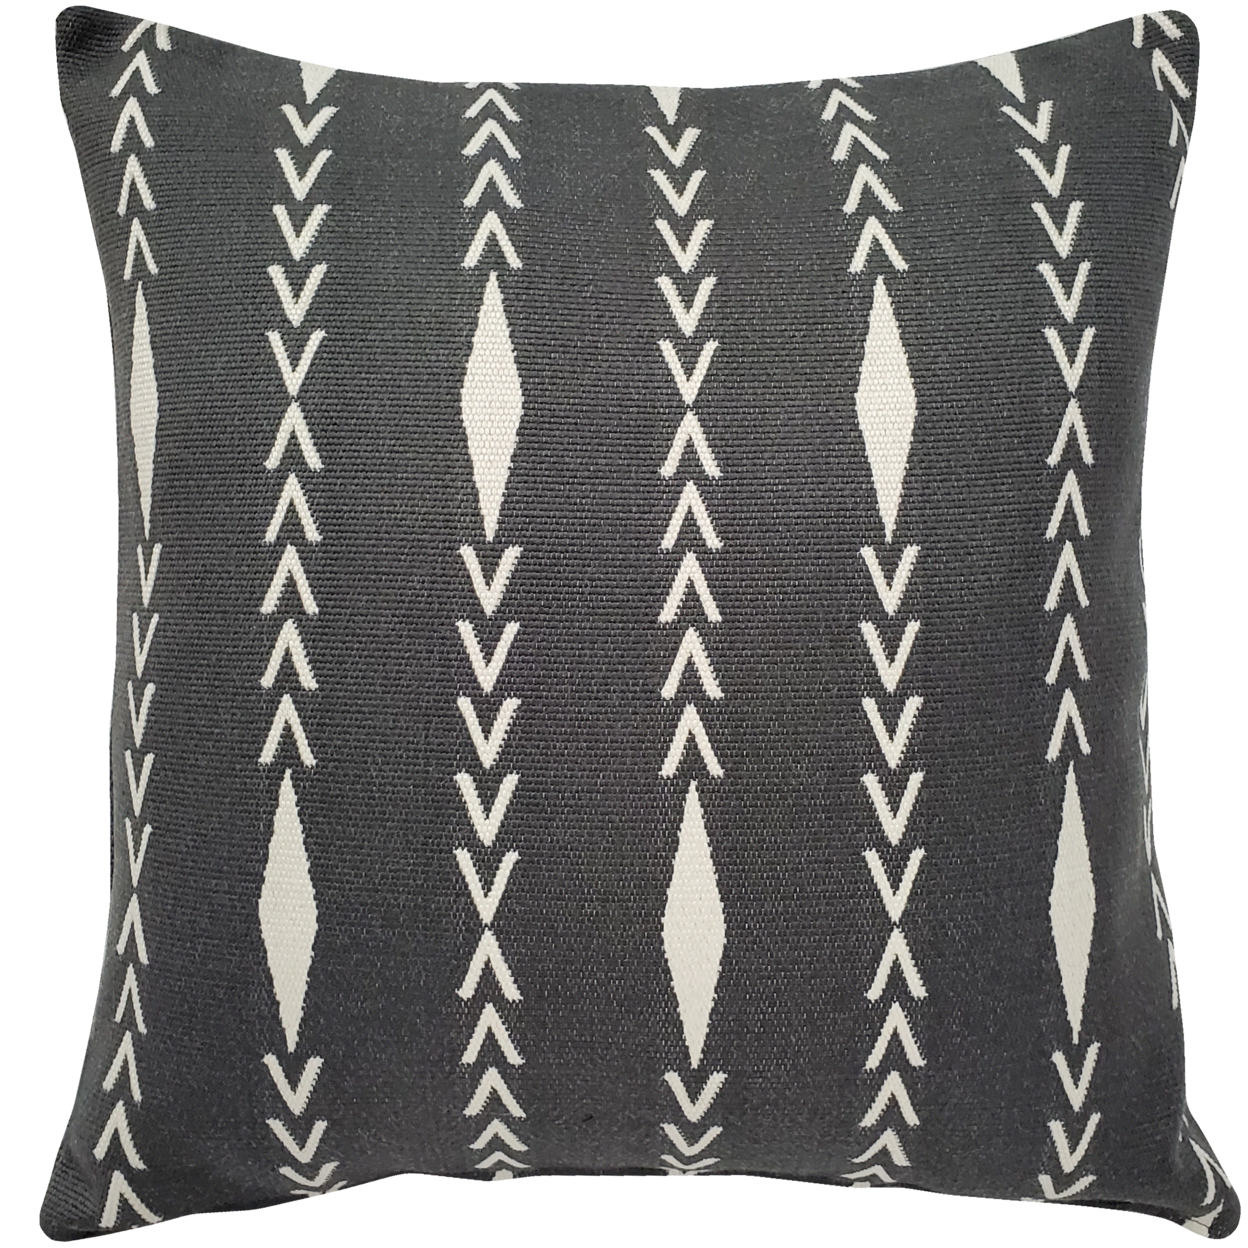 Diamond Ray Charcoal Gray Throw Pillow 20x20, With Polyfill Insert